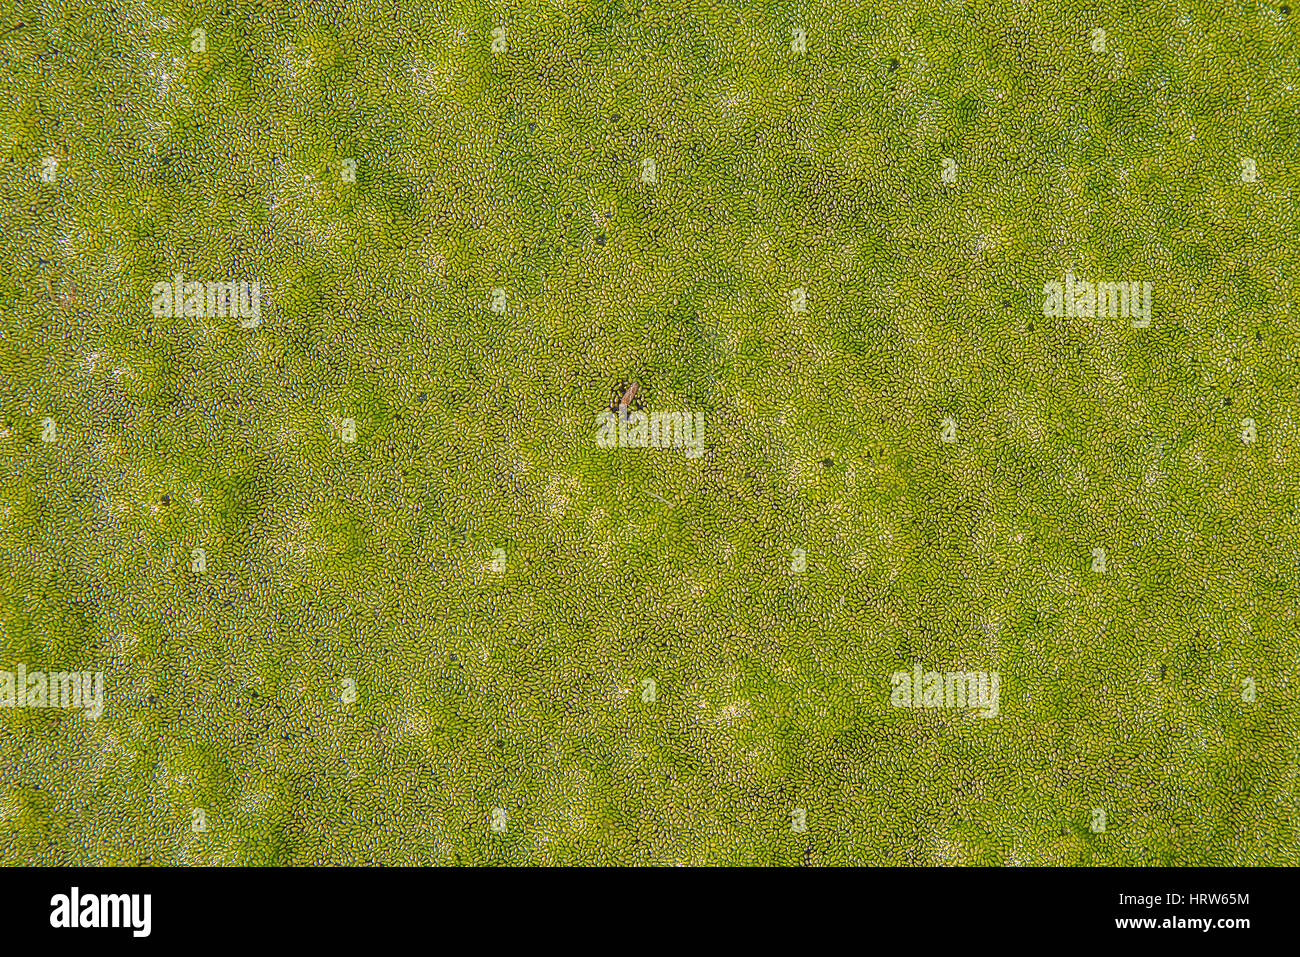 Water surface covered with green duckweed (Lemna) for background or texture Stock Photo